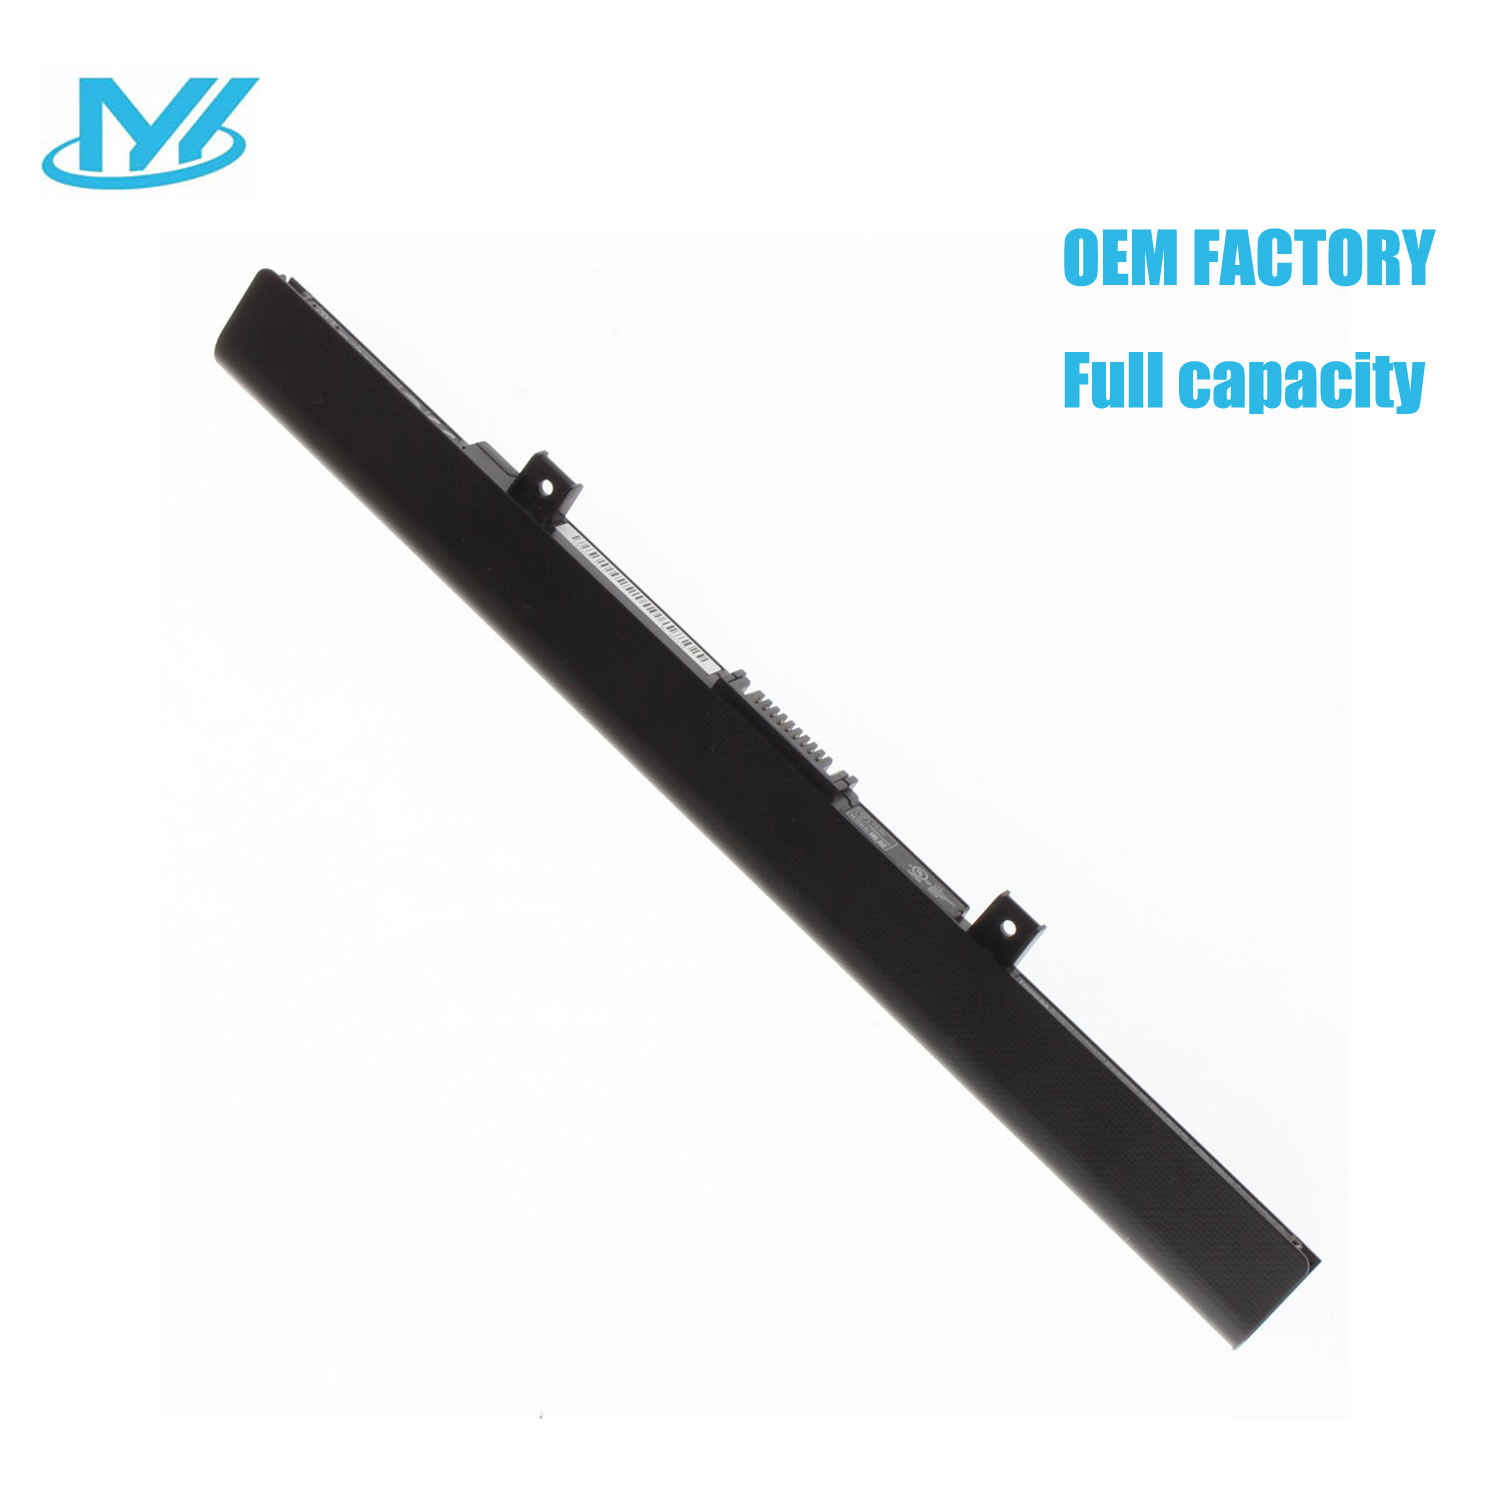 PA5185U-1BRS rechargeable lithium ion Notebook battery Laptop battery​C40-B C50-B L50-B L50-C C70-B C70D-B L50D-B L50T-B L70-B L50-B-24T L50-B-1JU Satellite C55 Satellite C55-A Satellite 